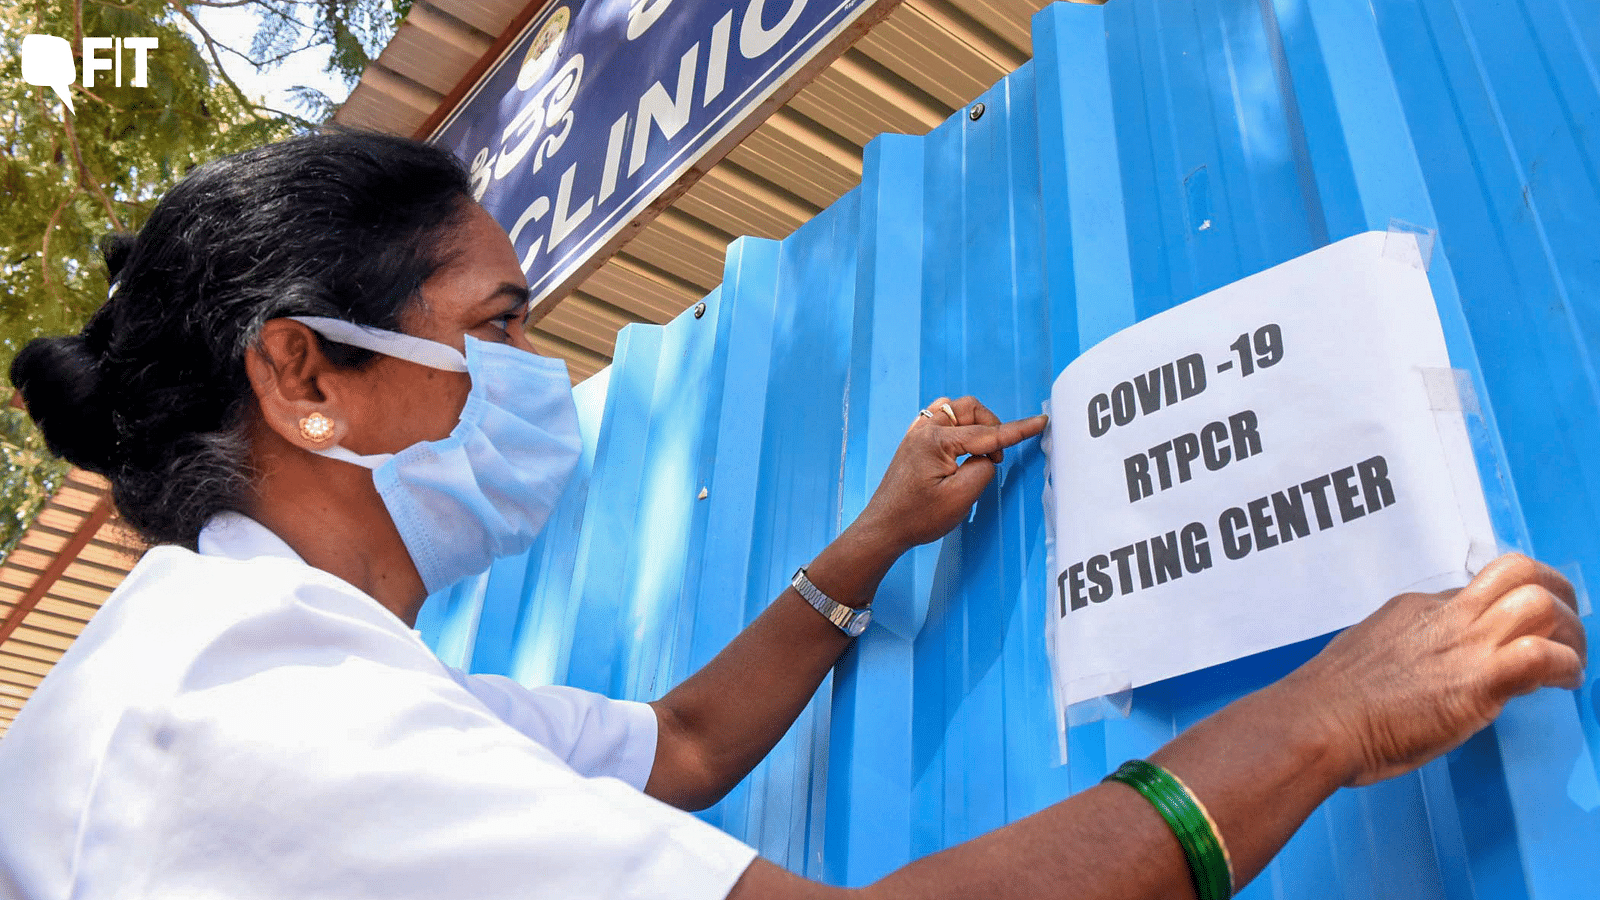 <div class="paragraphs"><p>Chikkamagaluru: A medic puts up a notice at a Covid-19 testing centre of the district hospital after cases of COVID-19 sub-variant JN.1 were detected in the country.</p></div>